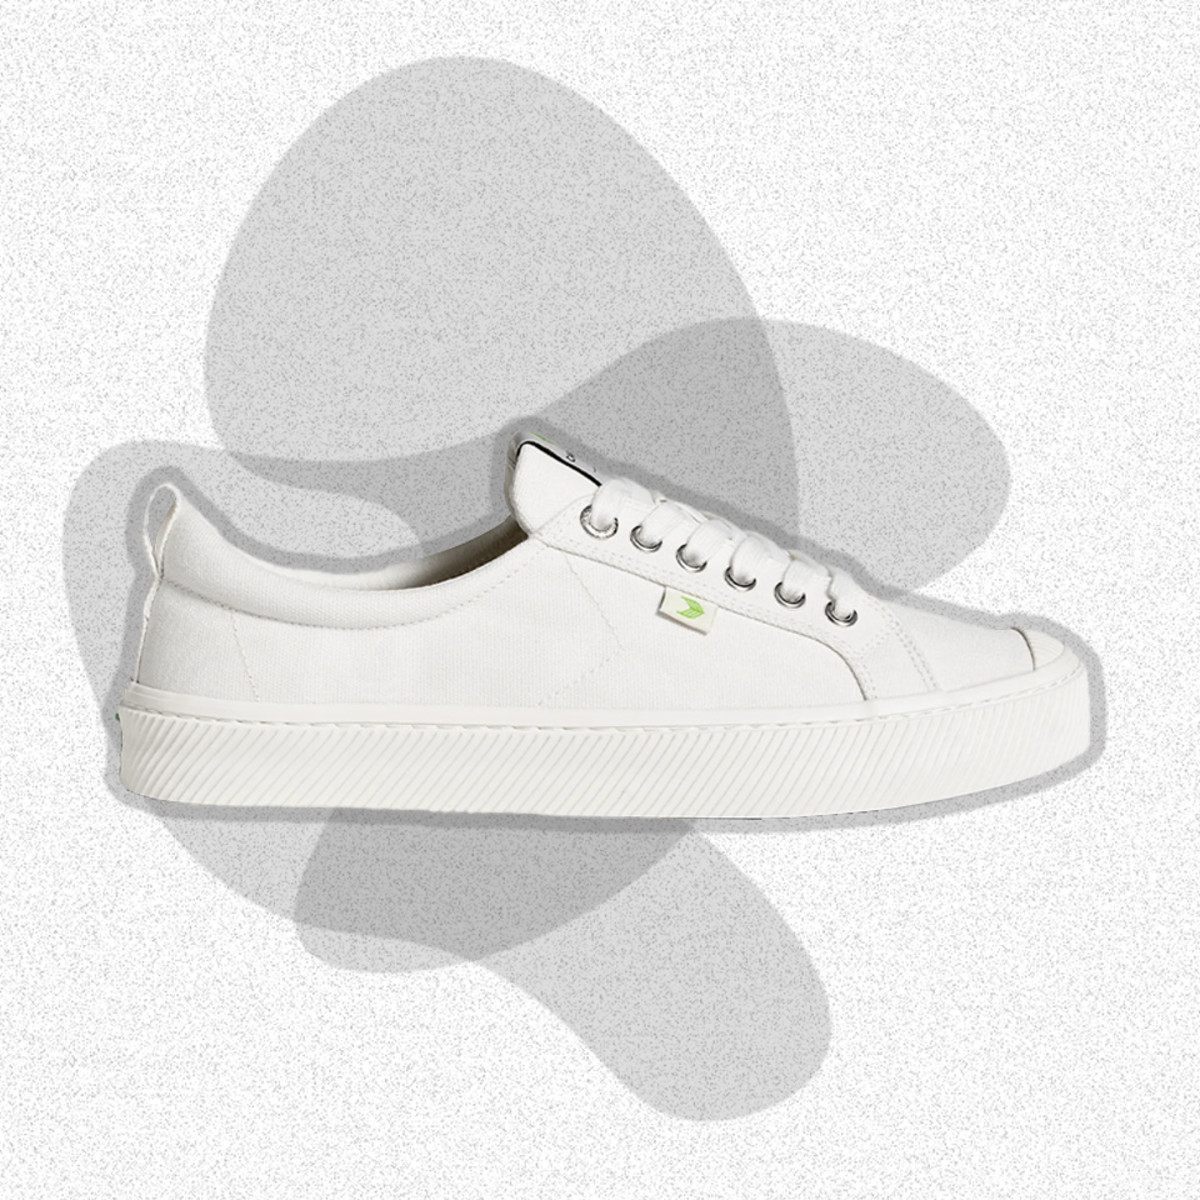 What should I buy, white casual shoes or off-white casual shoes? - Quora